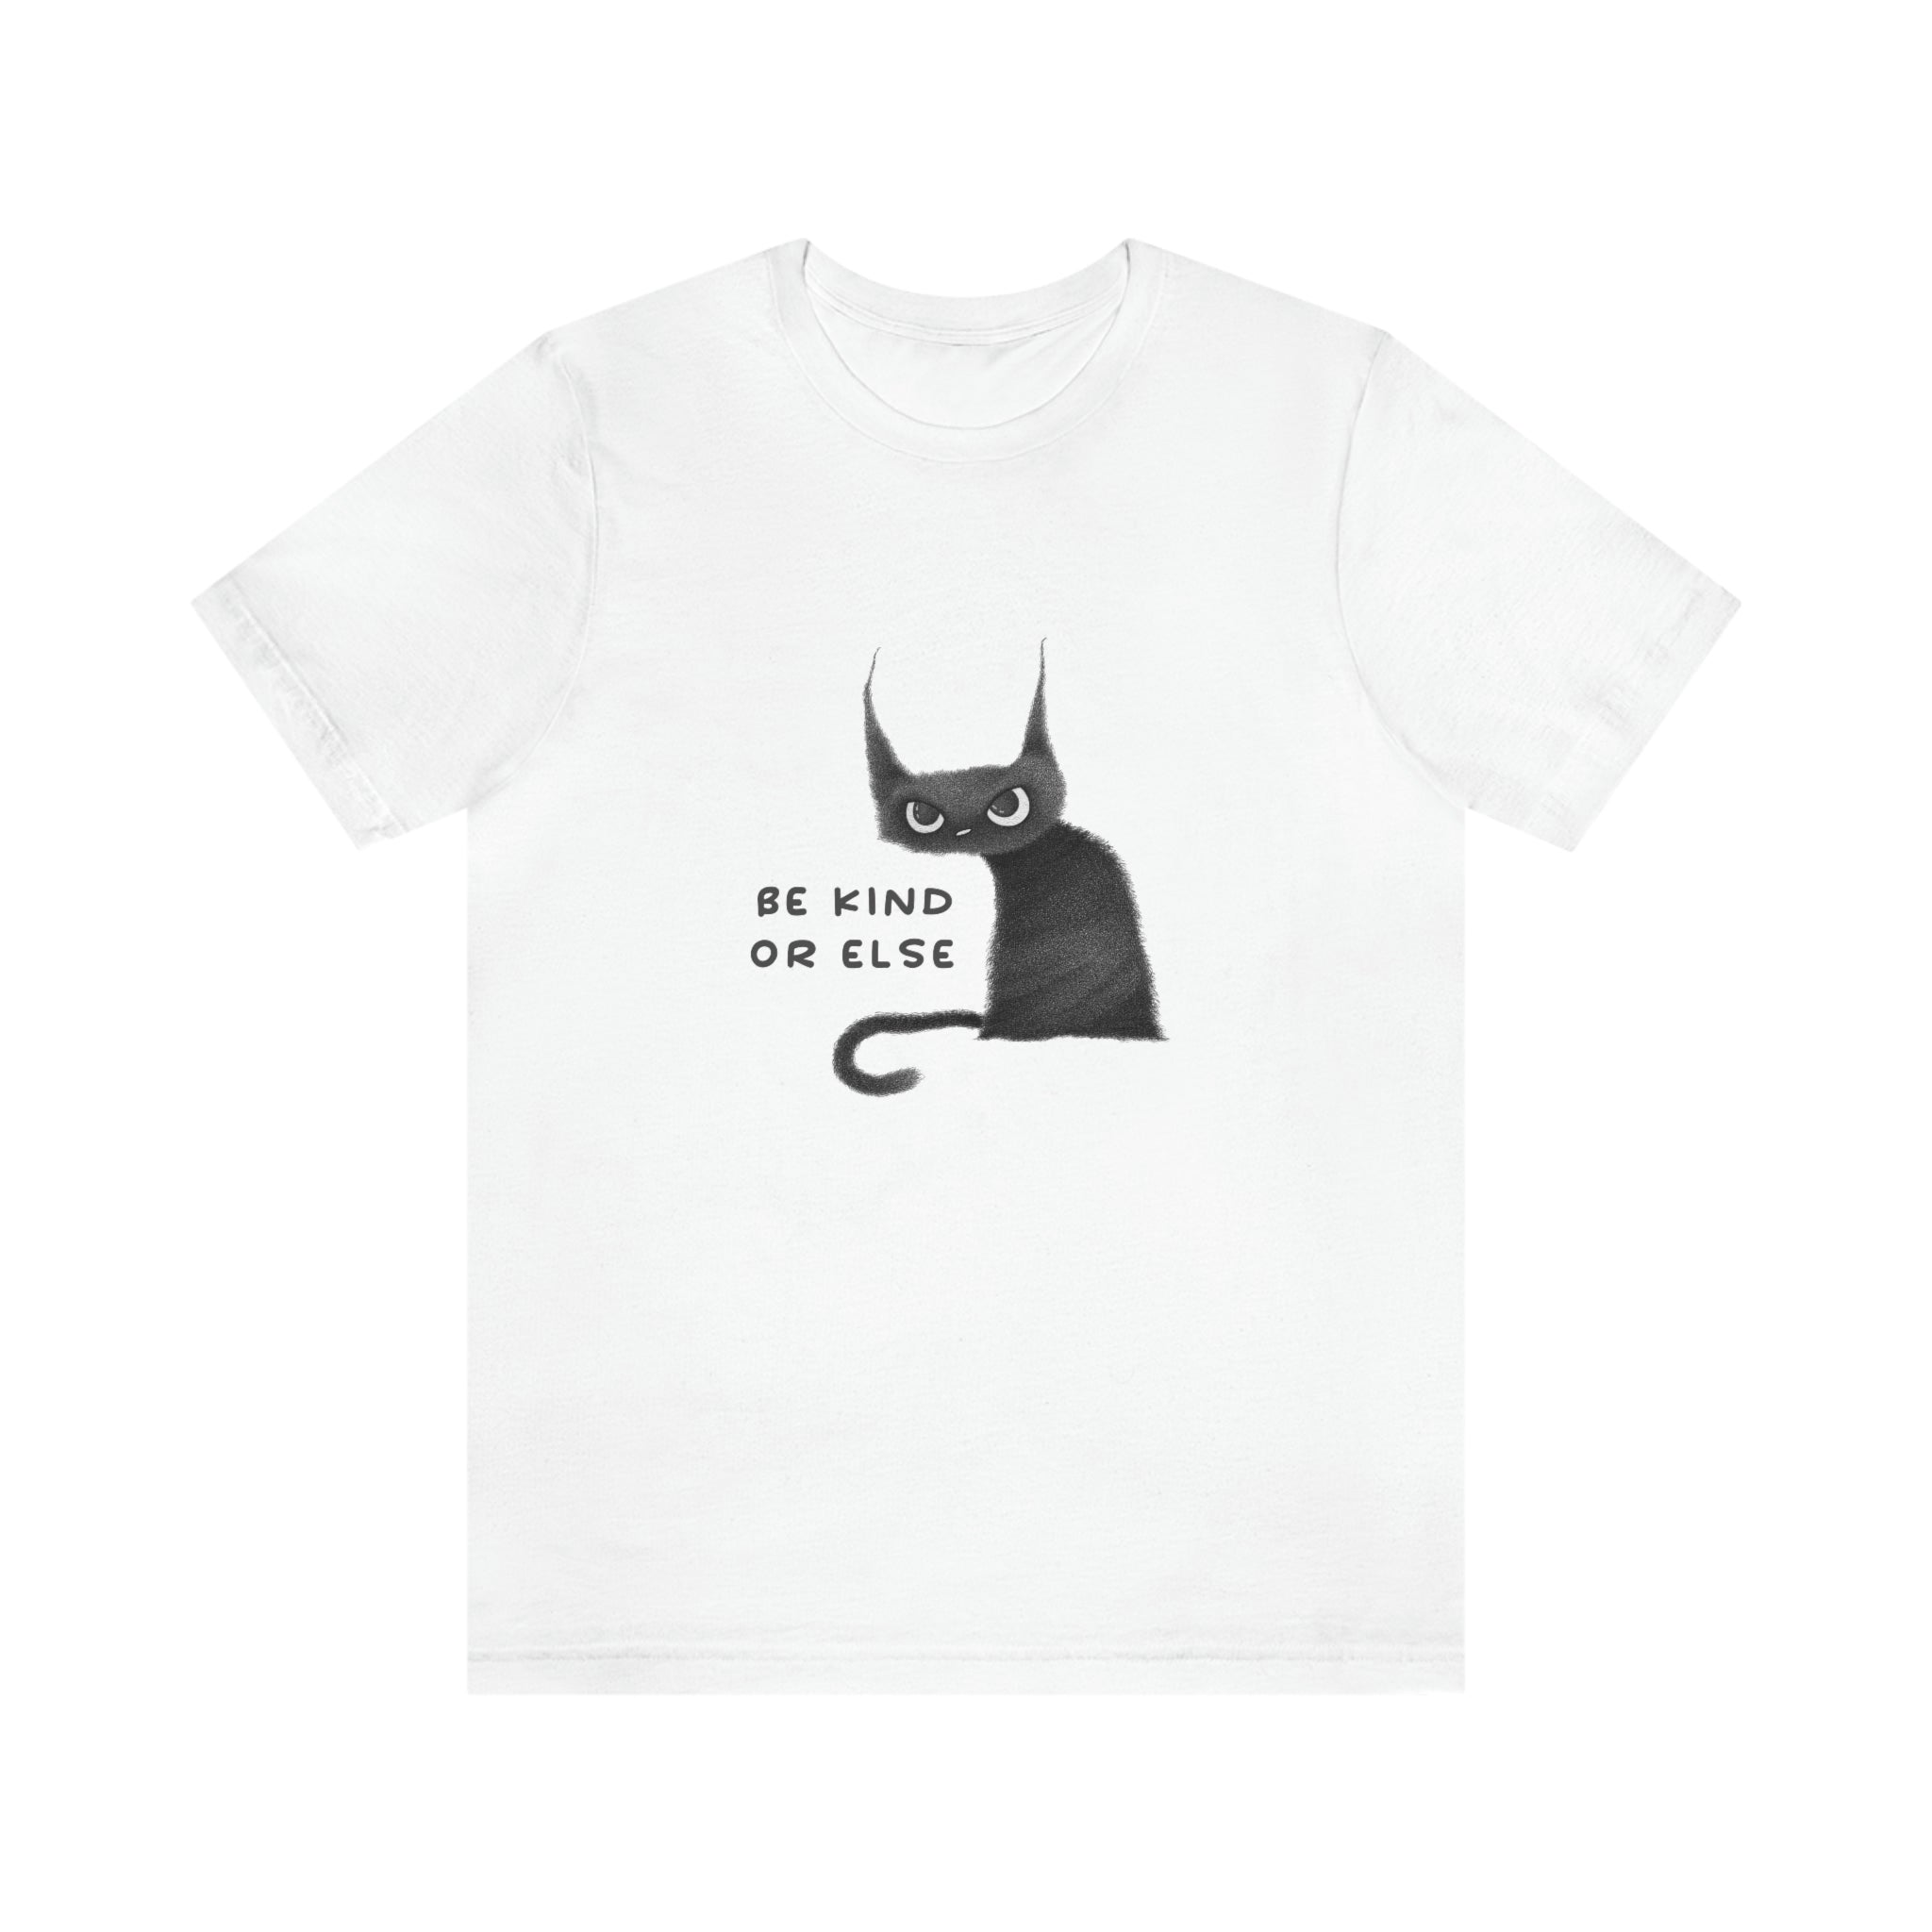 Be Kind Or Else : Unisex 100% Cotton T-Shirt by Bella+Canvas